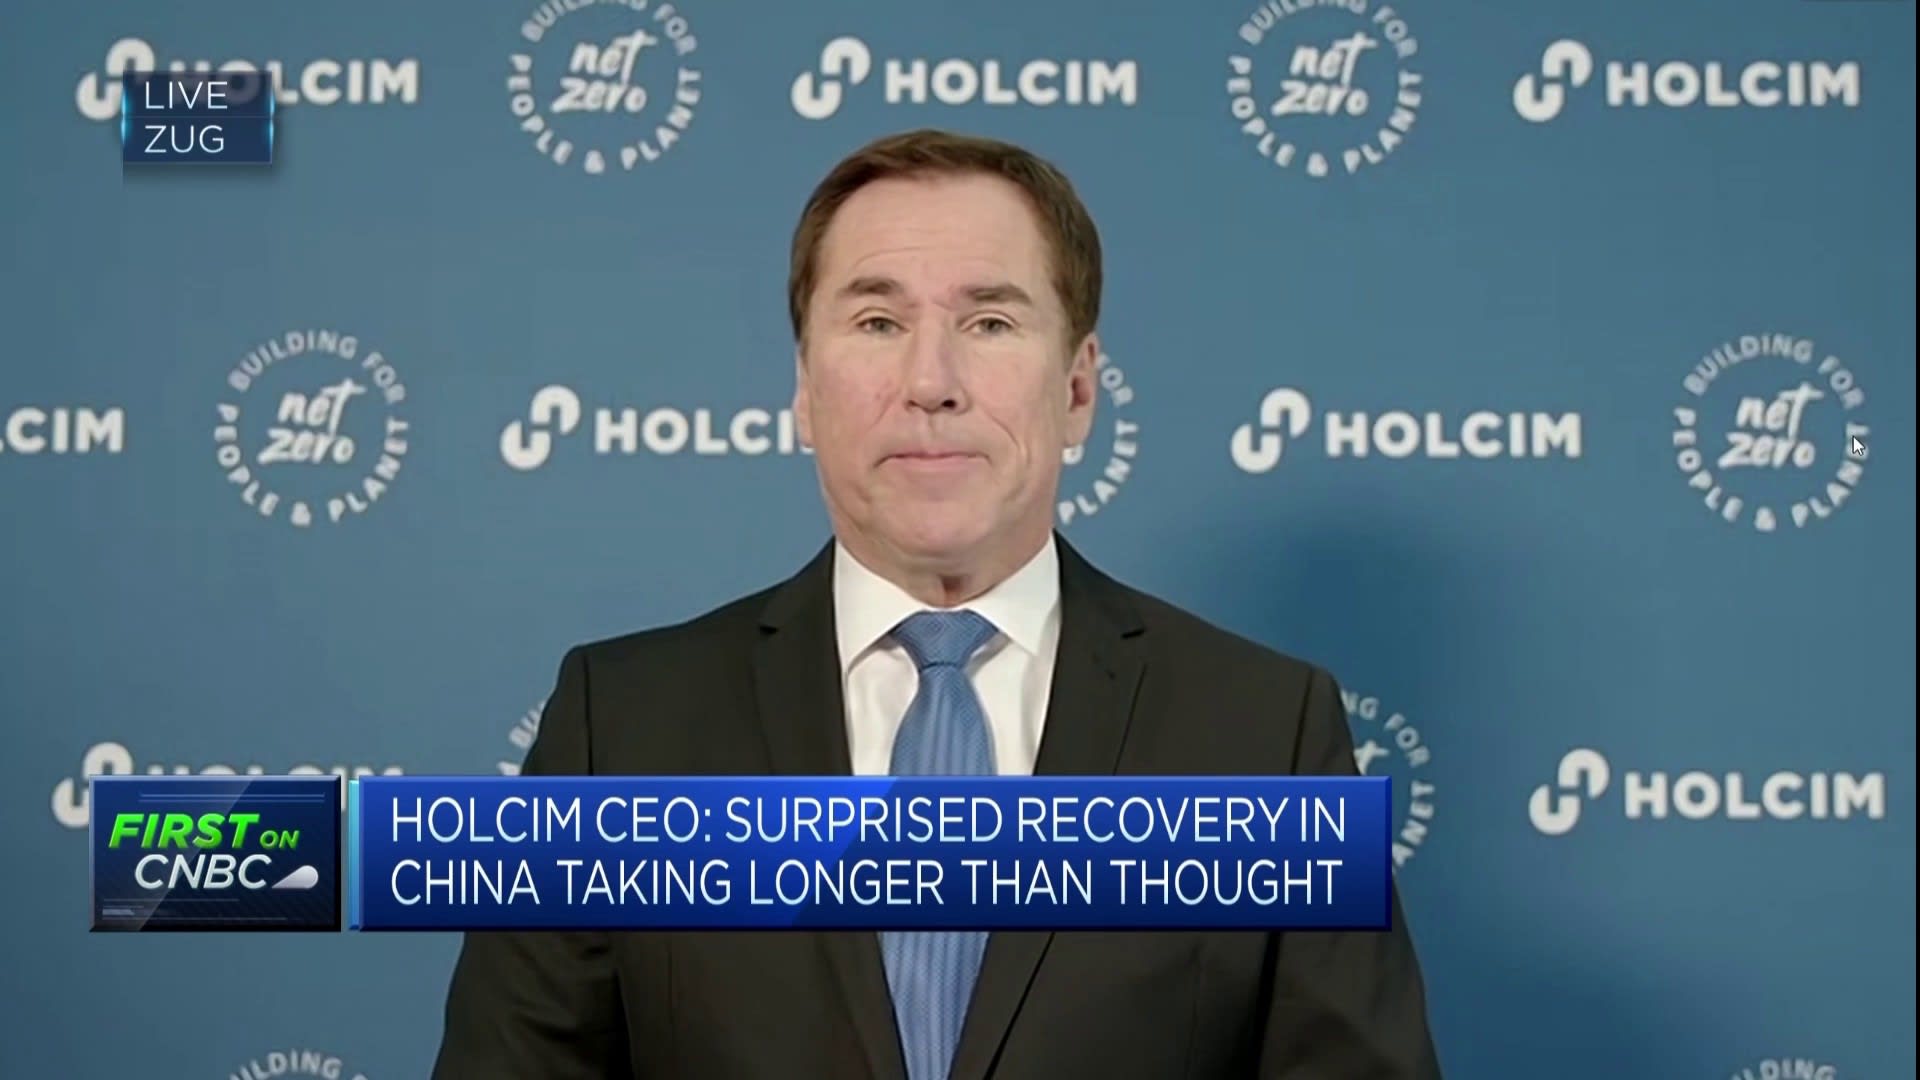 Holcim CEO says he's 'surprised' China's recovery is taking longer than expected